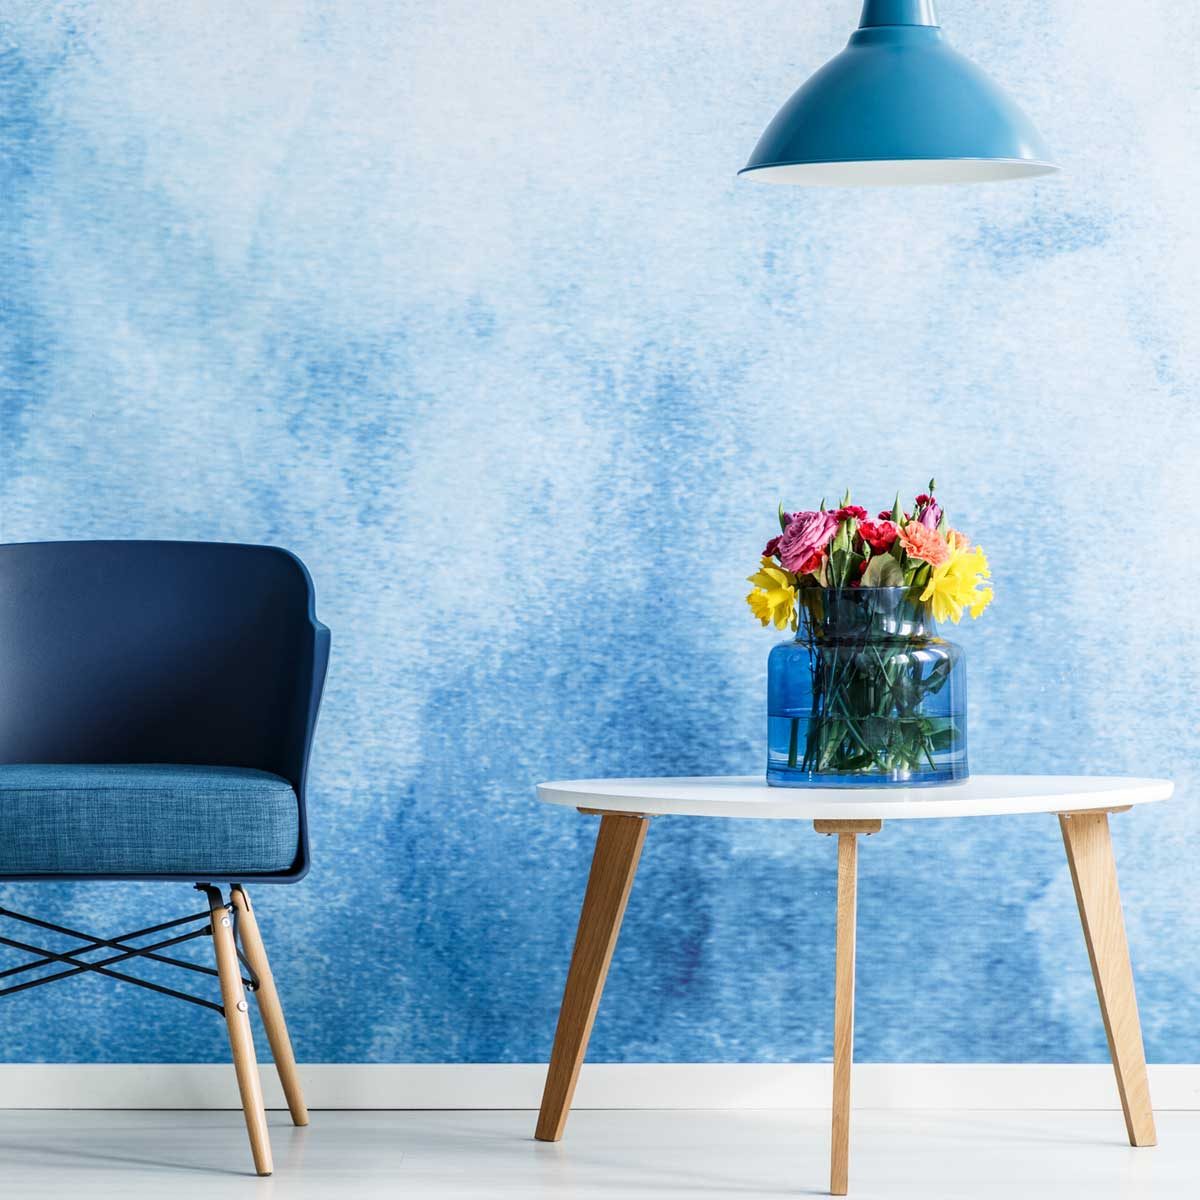 7 Textured Paint Ideas For Your Home